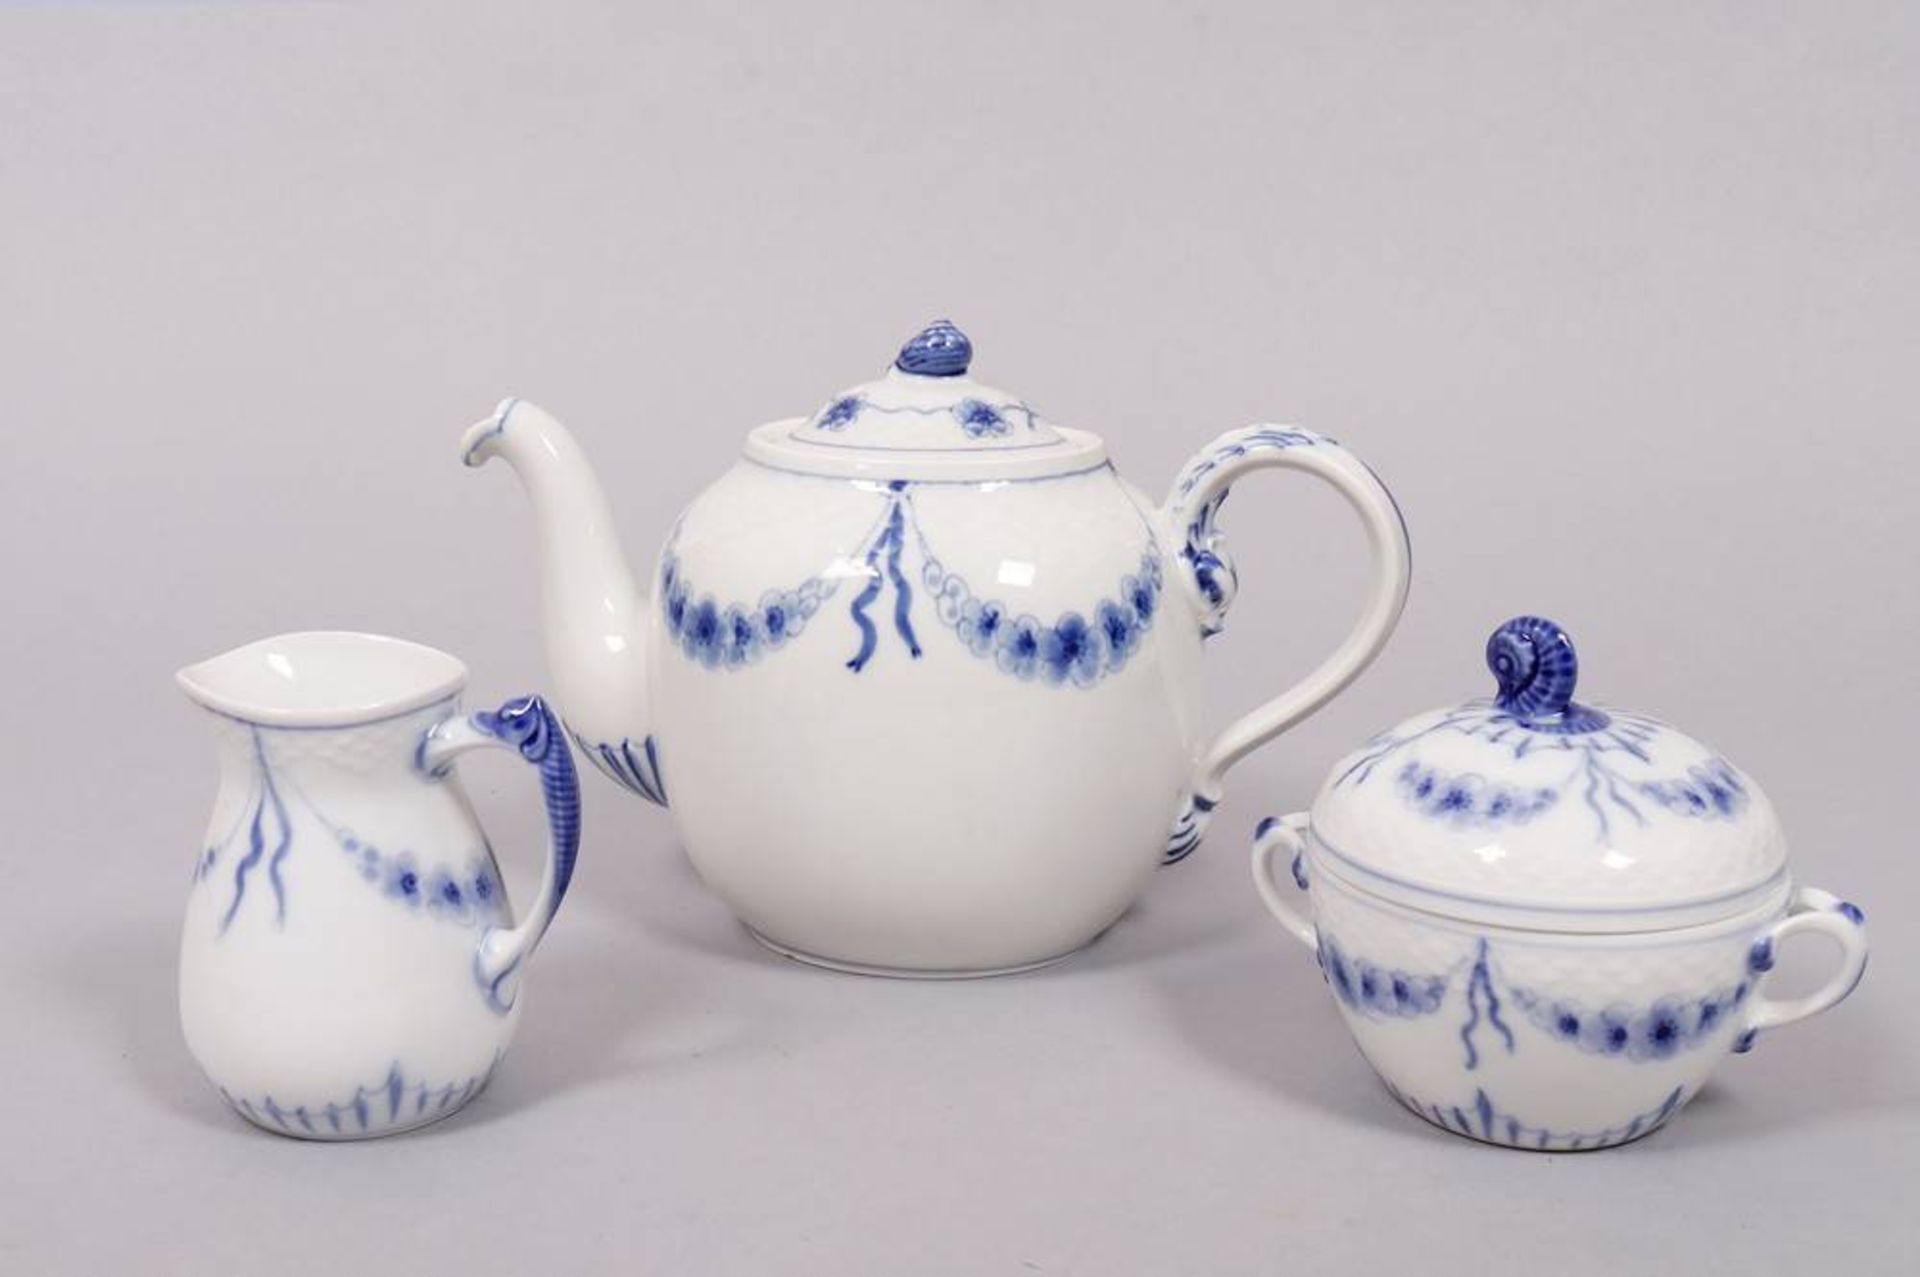 Tea service for 6 persons, Bing & Grondahl, shape and decor "Empire blue and white", 20th C. - Image 4 of 6